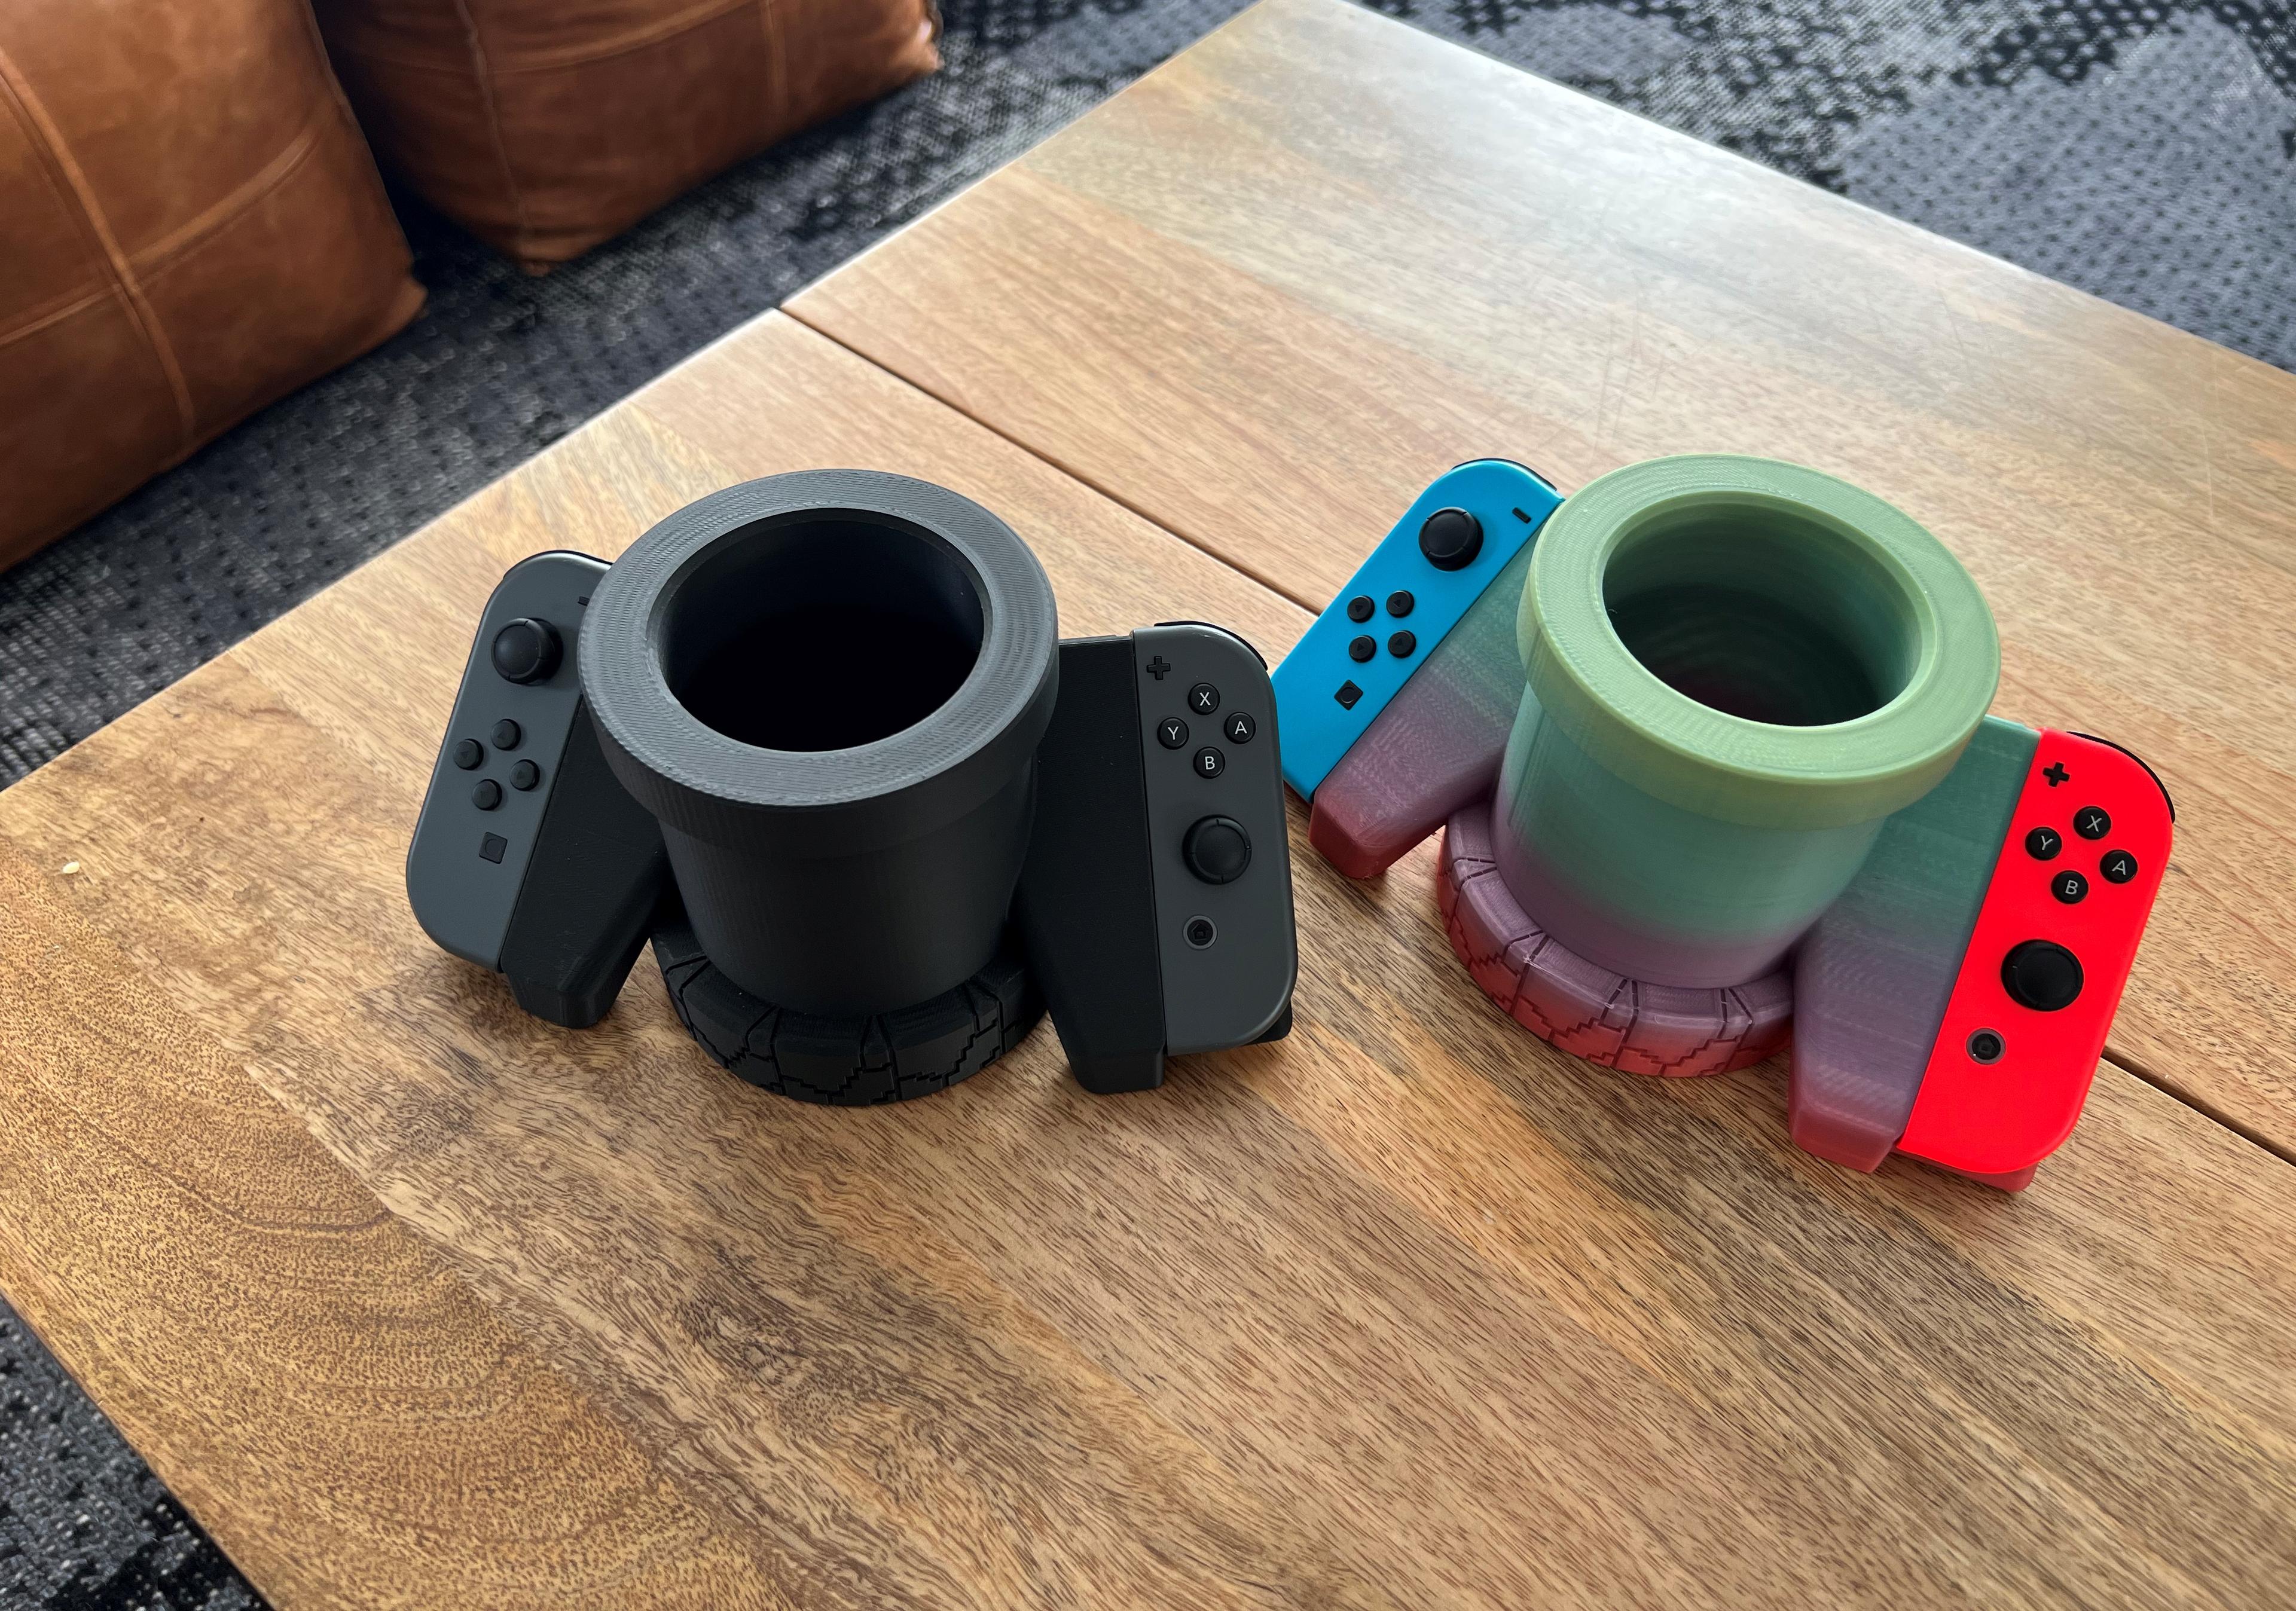 Warped Cup - Nintendo Joy Con Grip 12oz Can Cup! - Multi-colored and black Joy-con can cups - make for Epic Beerio Kart! - 3d model